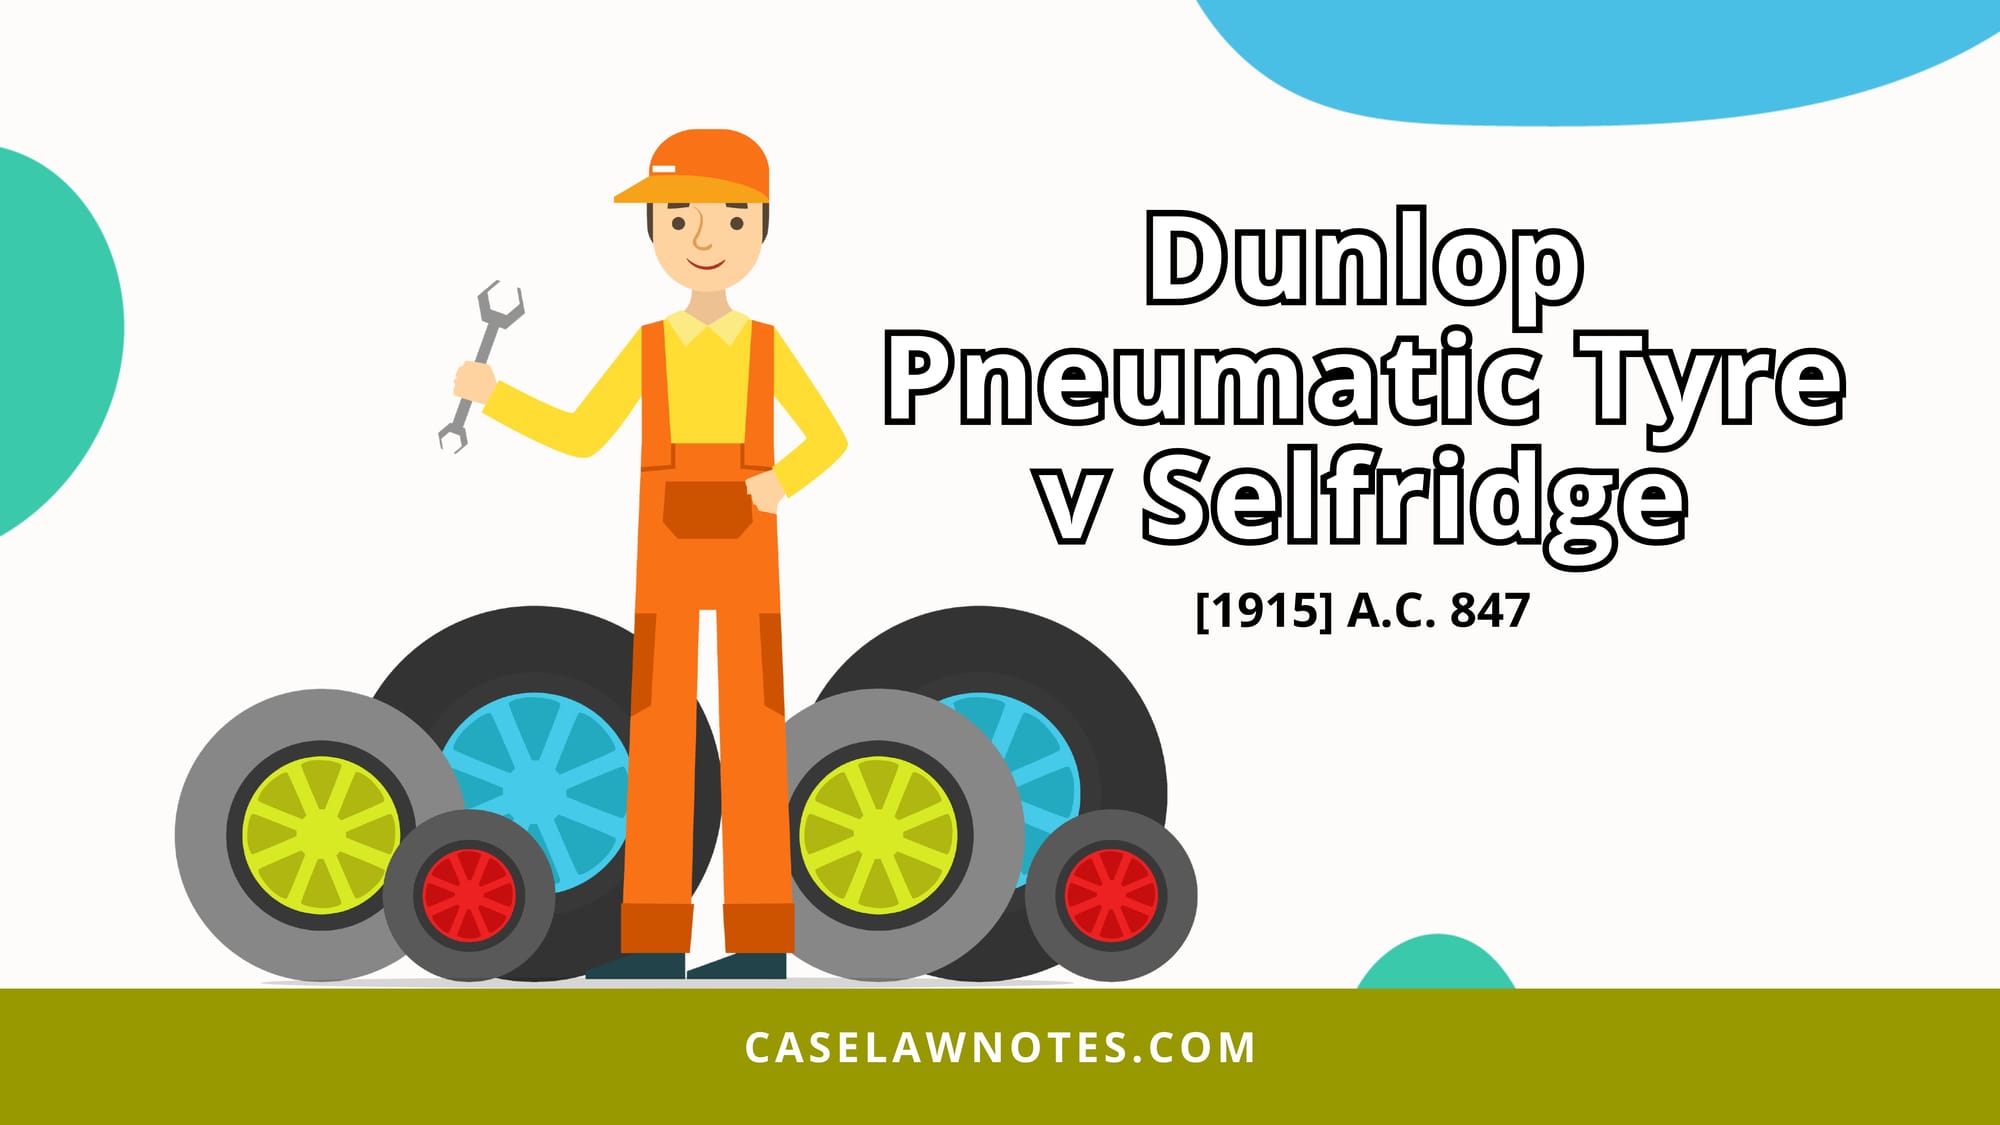 Dunlop Pneumatic Tyre Co Ltd v Selfridge & Co Ltd - privity of contract - undisclosed agent - consideration - contract